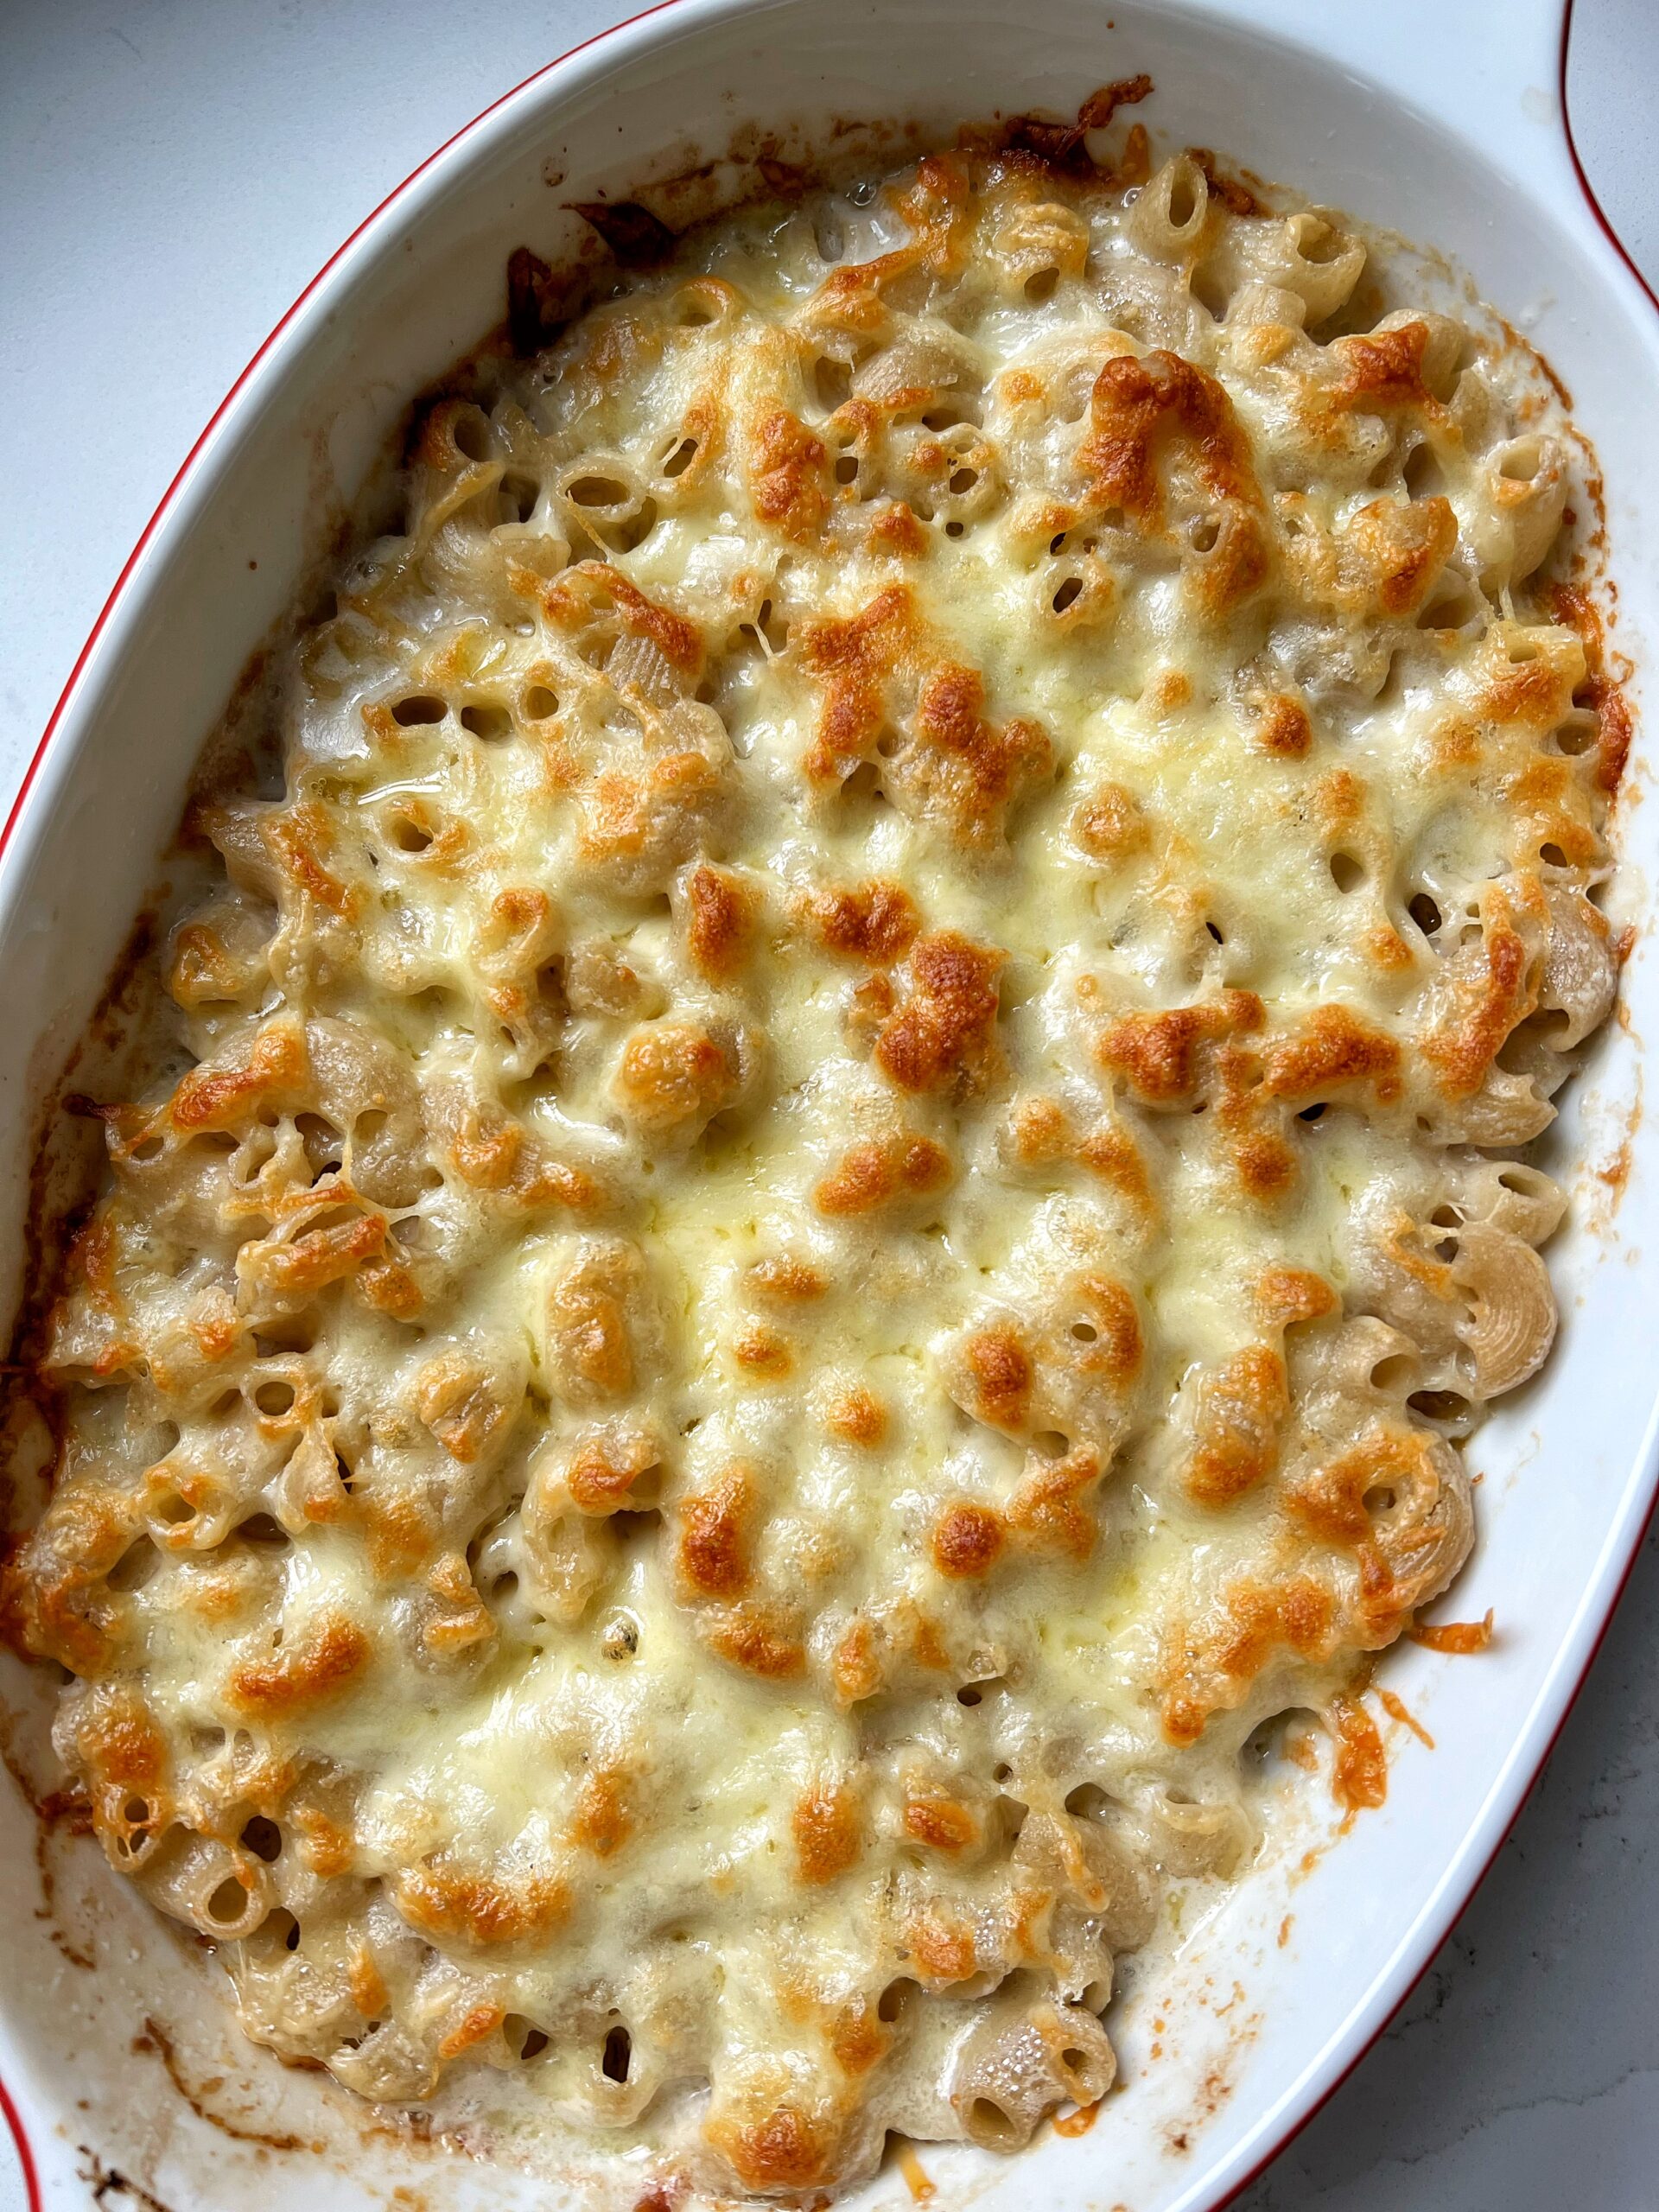 The Best Baked Mac and Cheese Recipe (gluten-free) - rachLmansfield